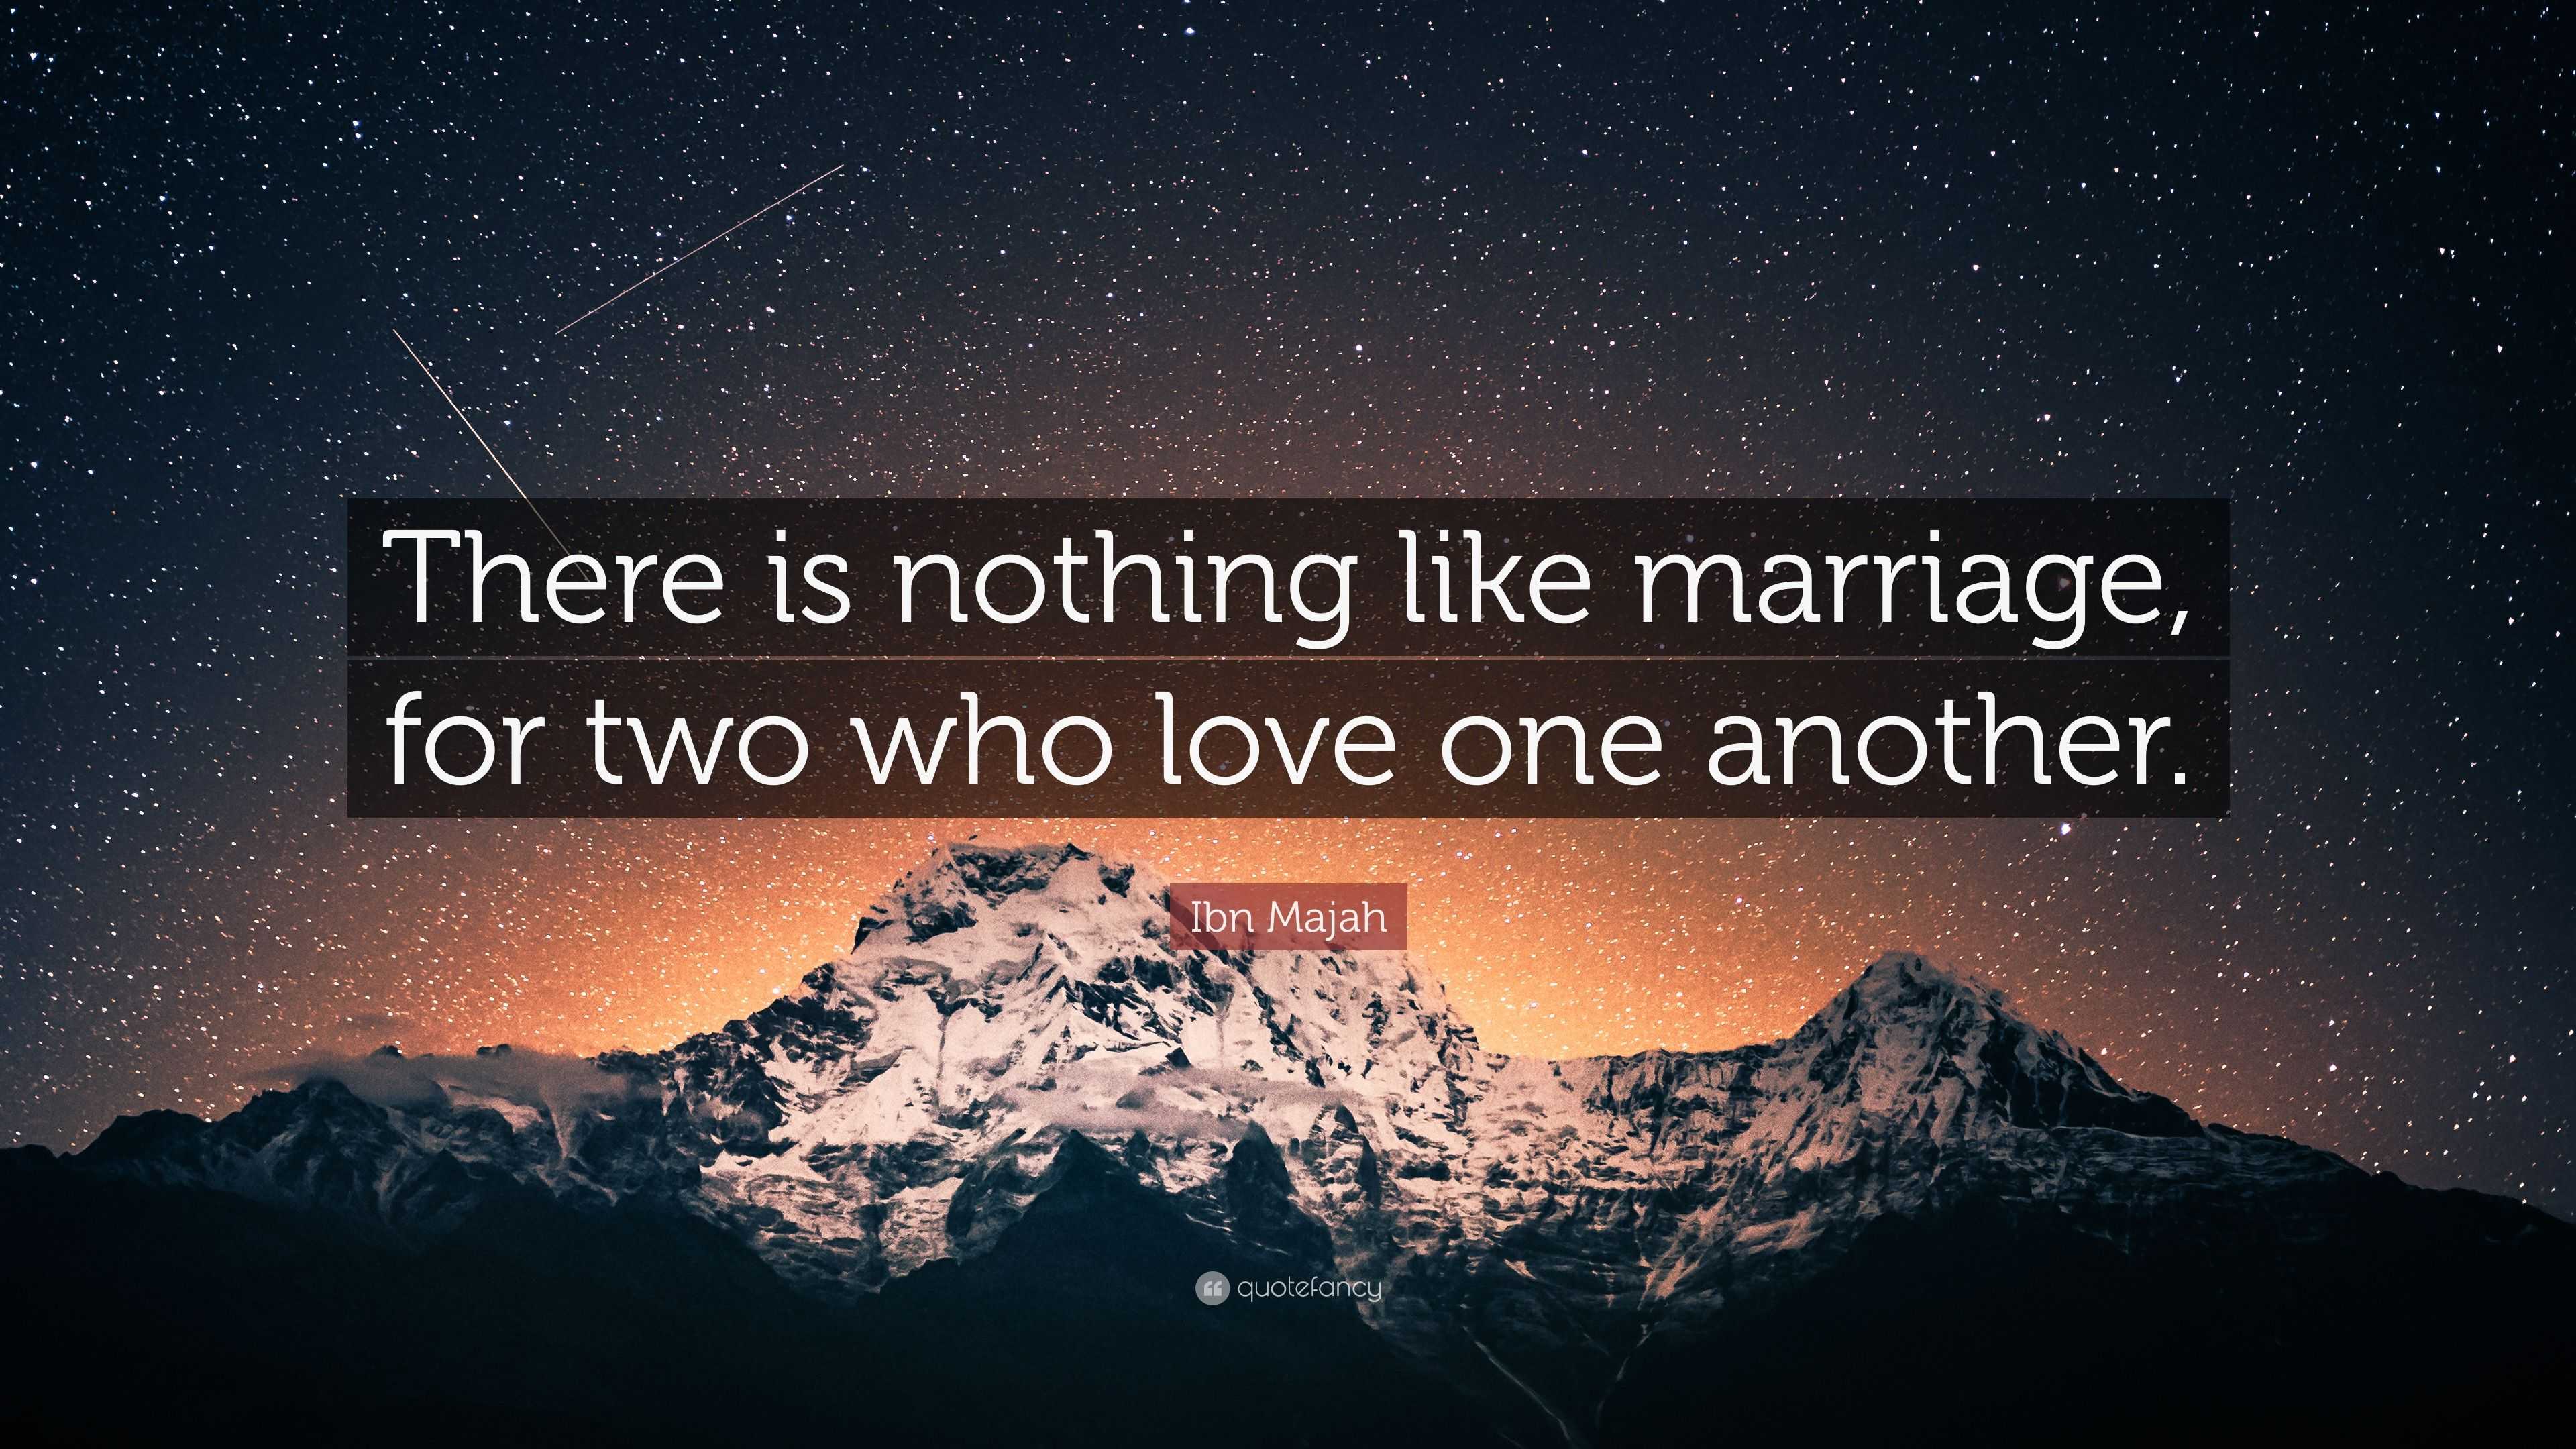 Ibn Majah Quote “There is nothing like marriage for two who love one